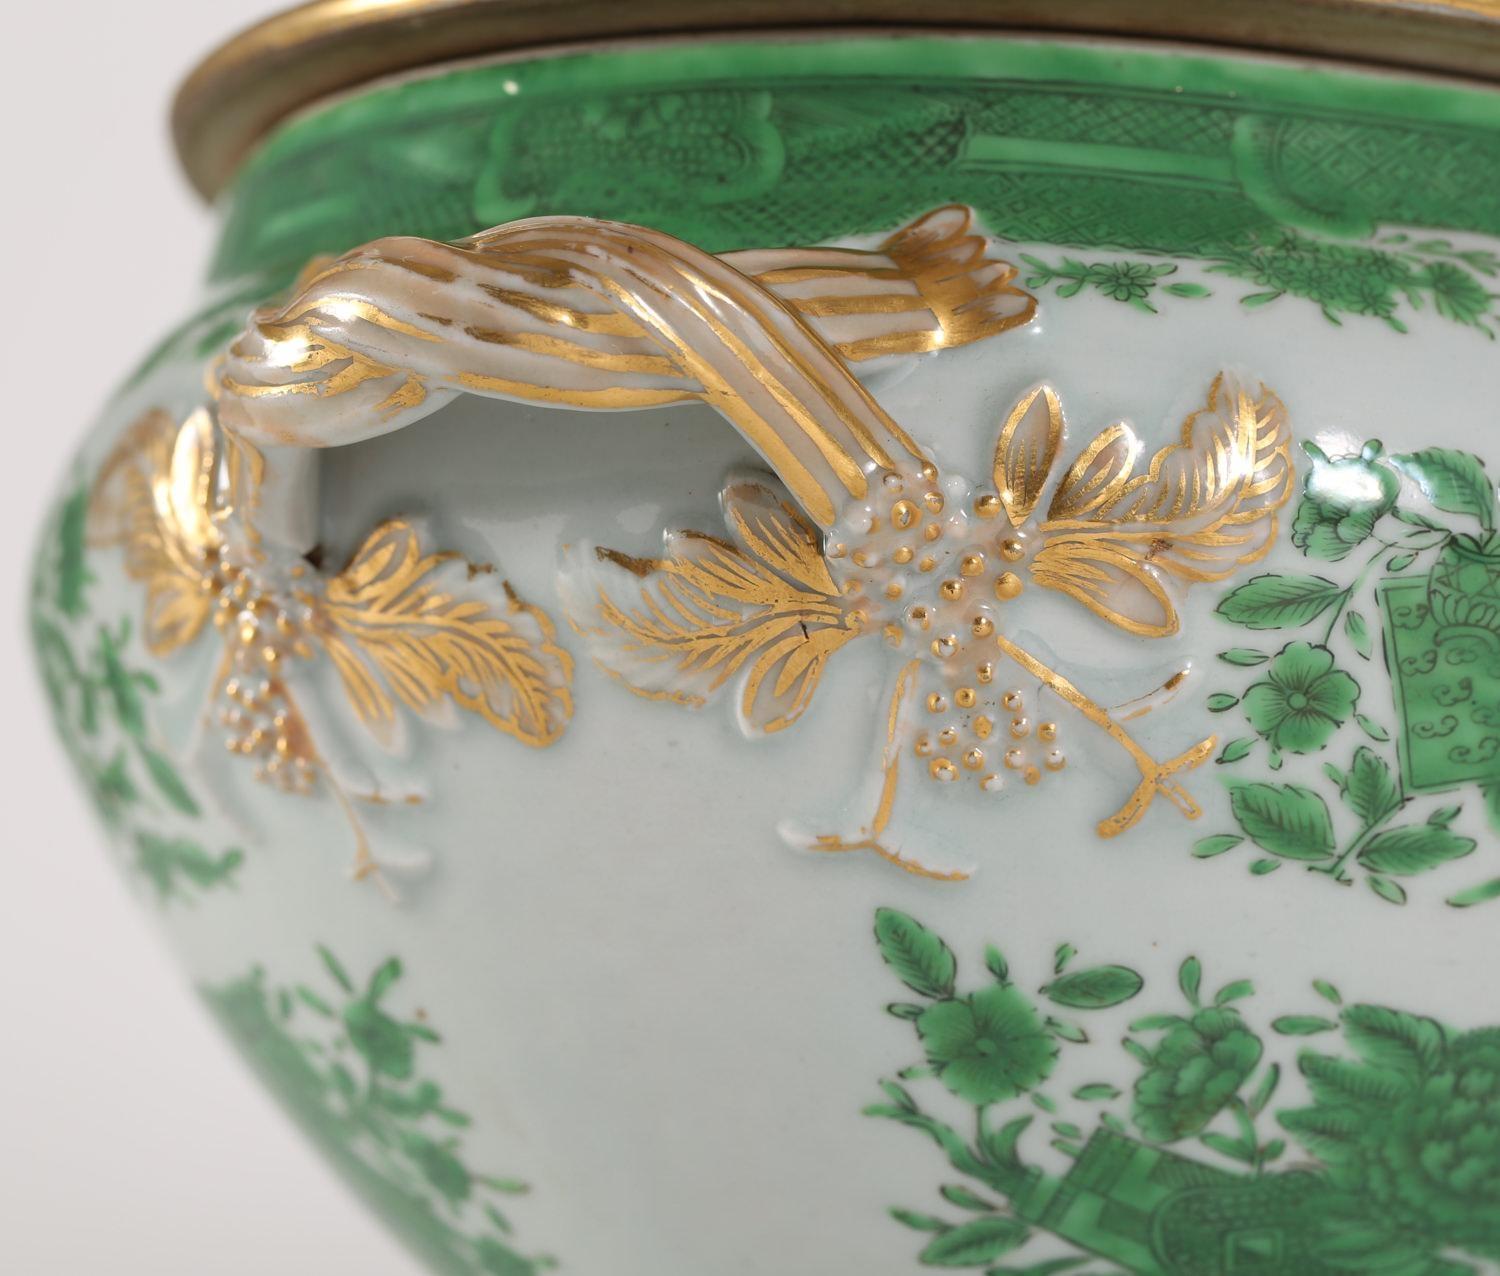 18th Century Chinese Export Porcelain Fitzhugh Pattern Tureen, Cover and Underplate For Sale